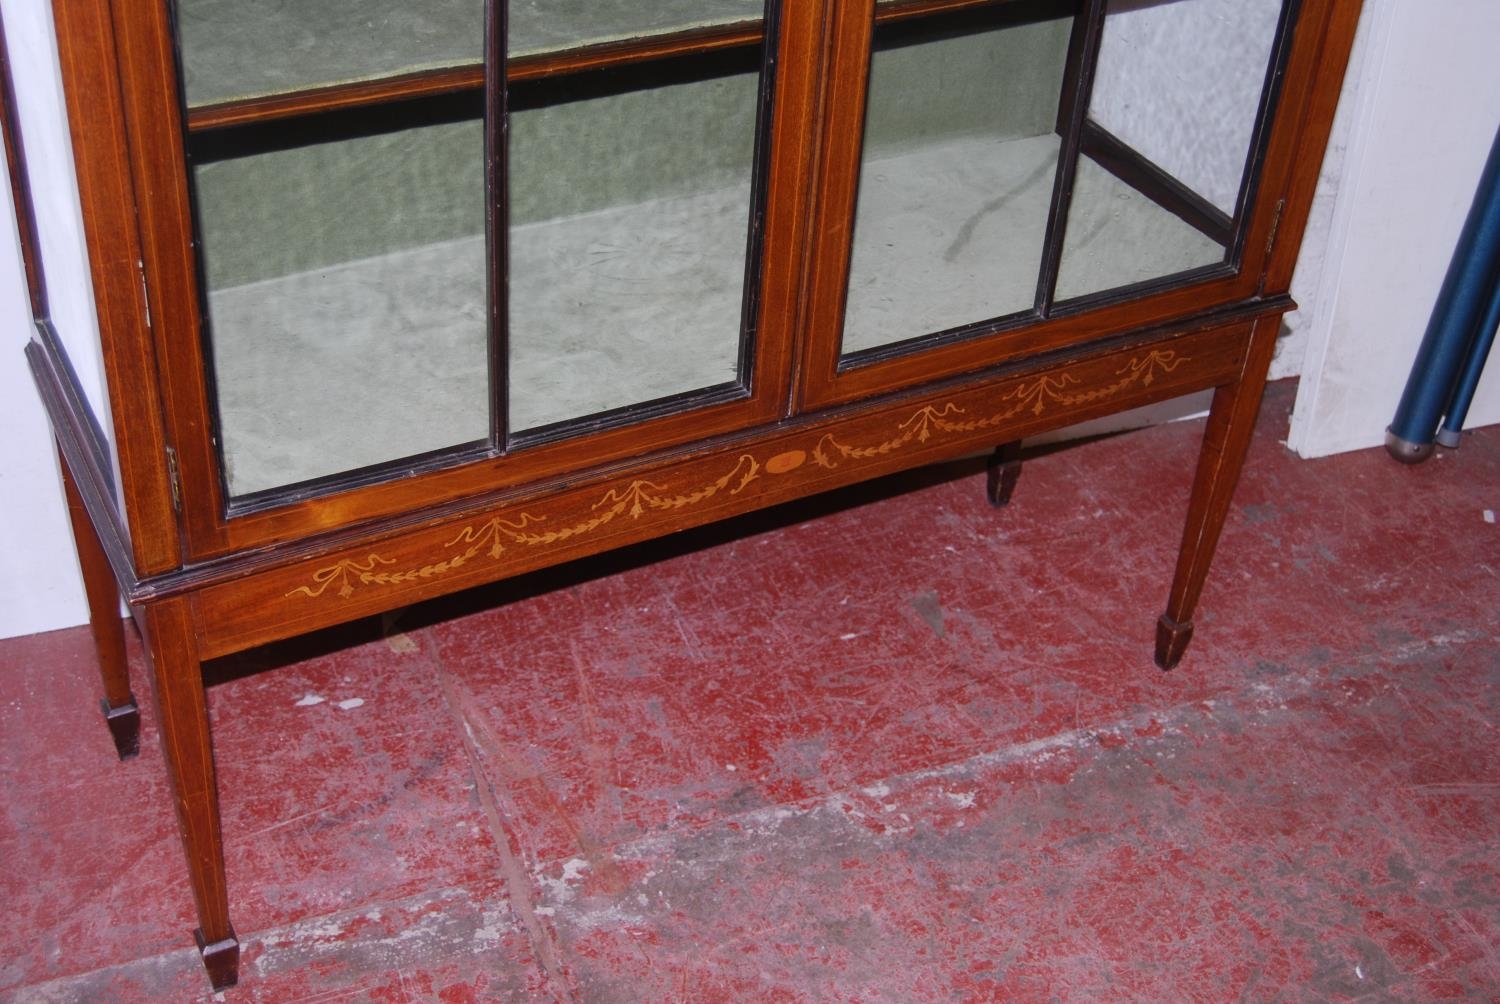 Edwardian inlaid mahogany display cabinet, with a concentric pierced pediment top above an inlaid - Image 3 of 5